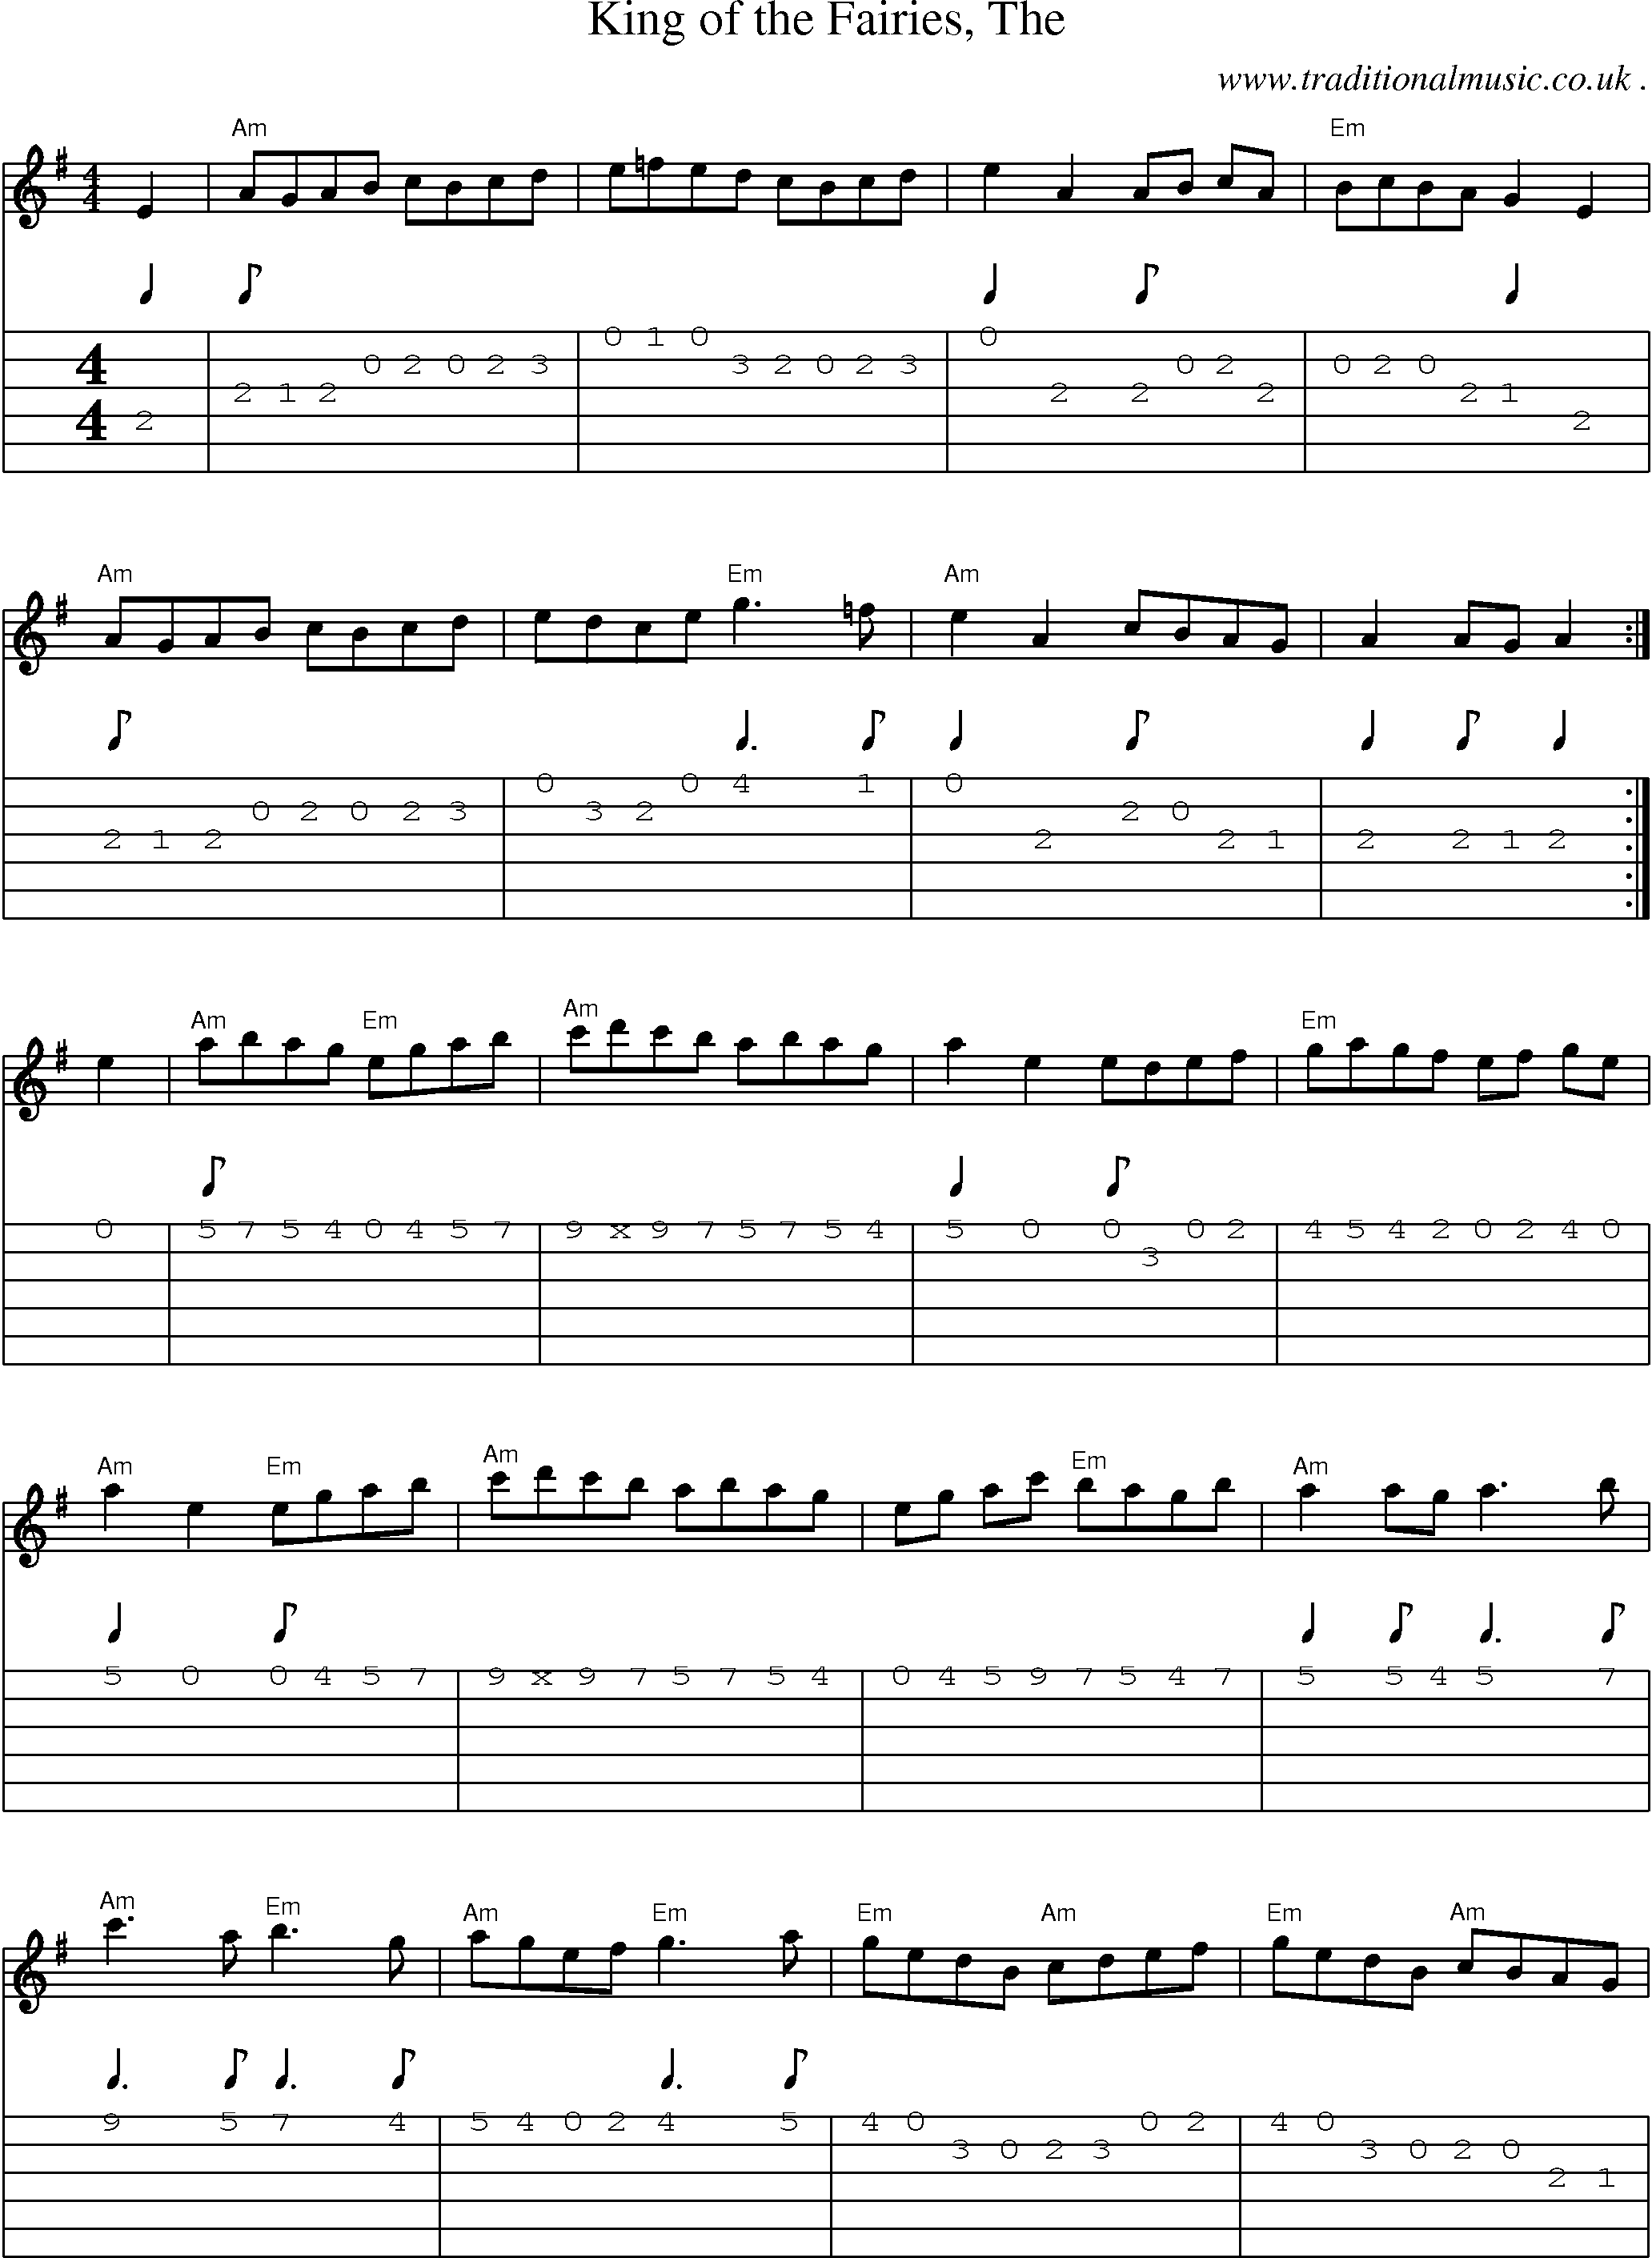 Music Score and Guitar Tabs for King of the Fairies The